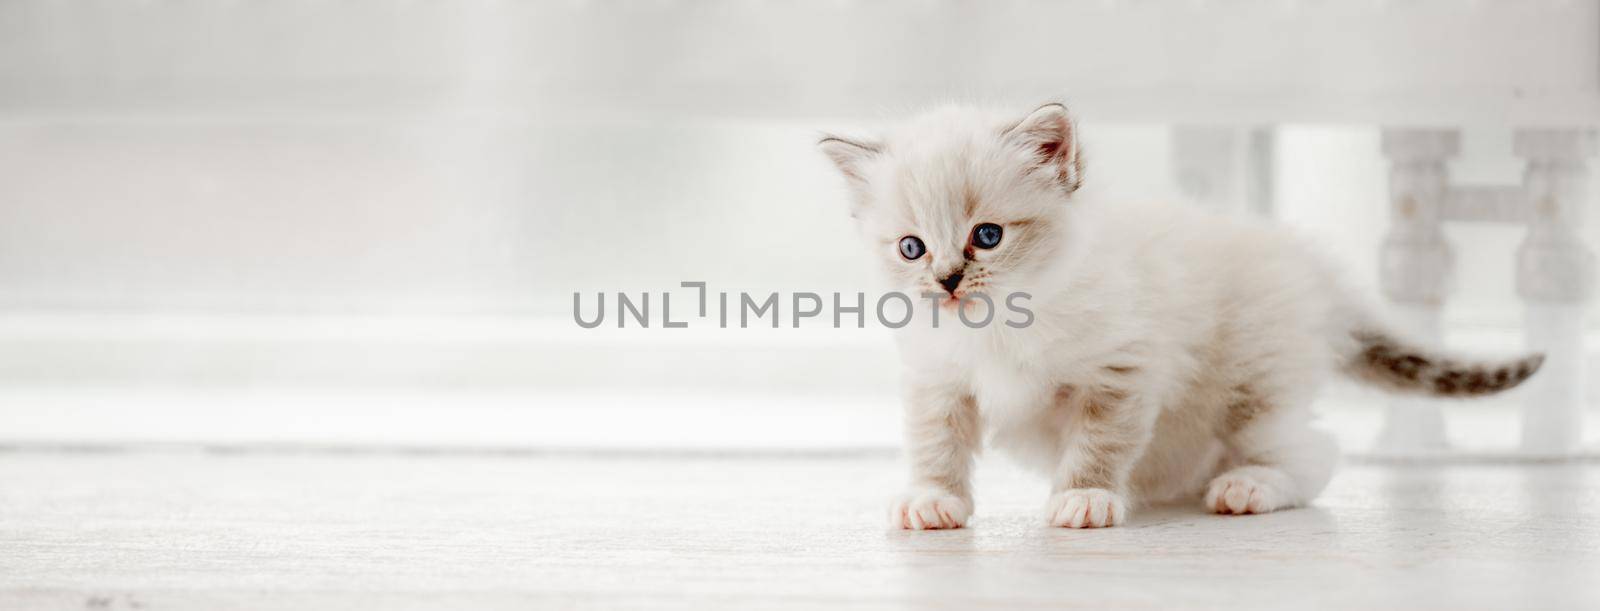 Adorable fluffy ragdoll kitten with beautiful blue eyes standing isolated on blurred white background. Cute little kitty in light room with daylight. Horizontal portrait of purebred small cat